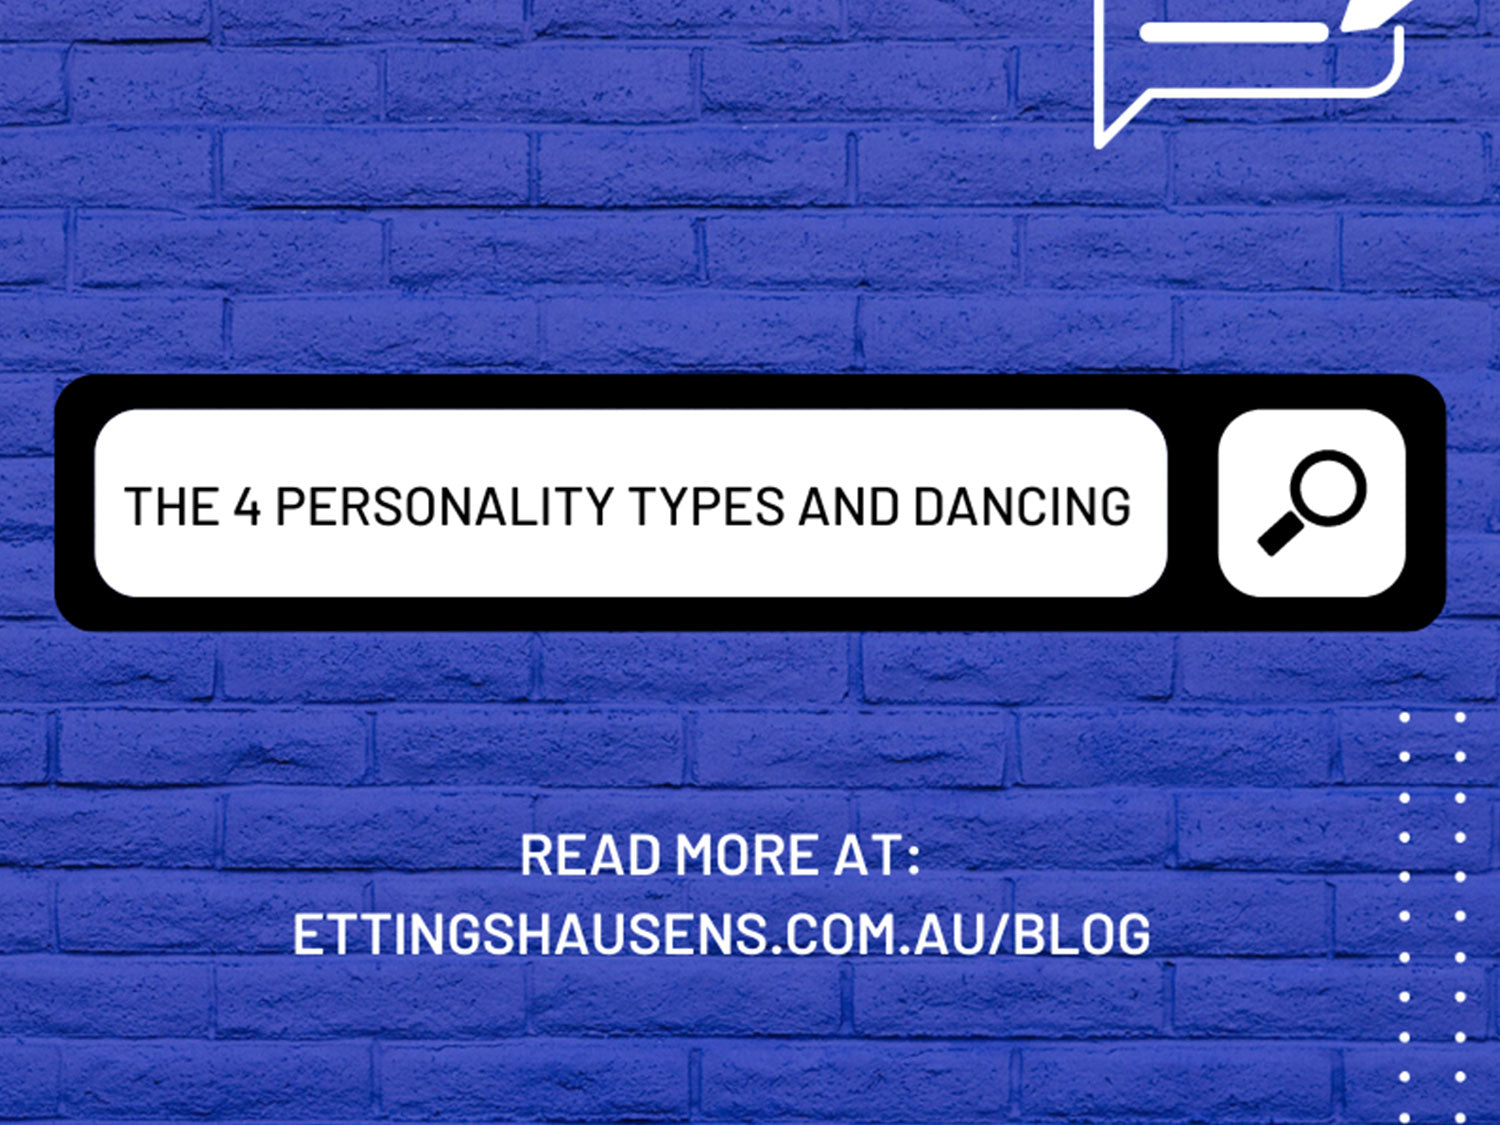 The 4 Personality Types and Dancing